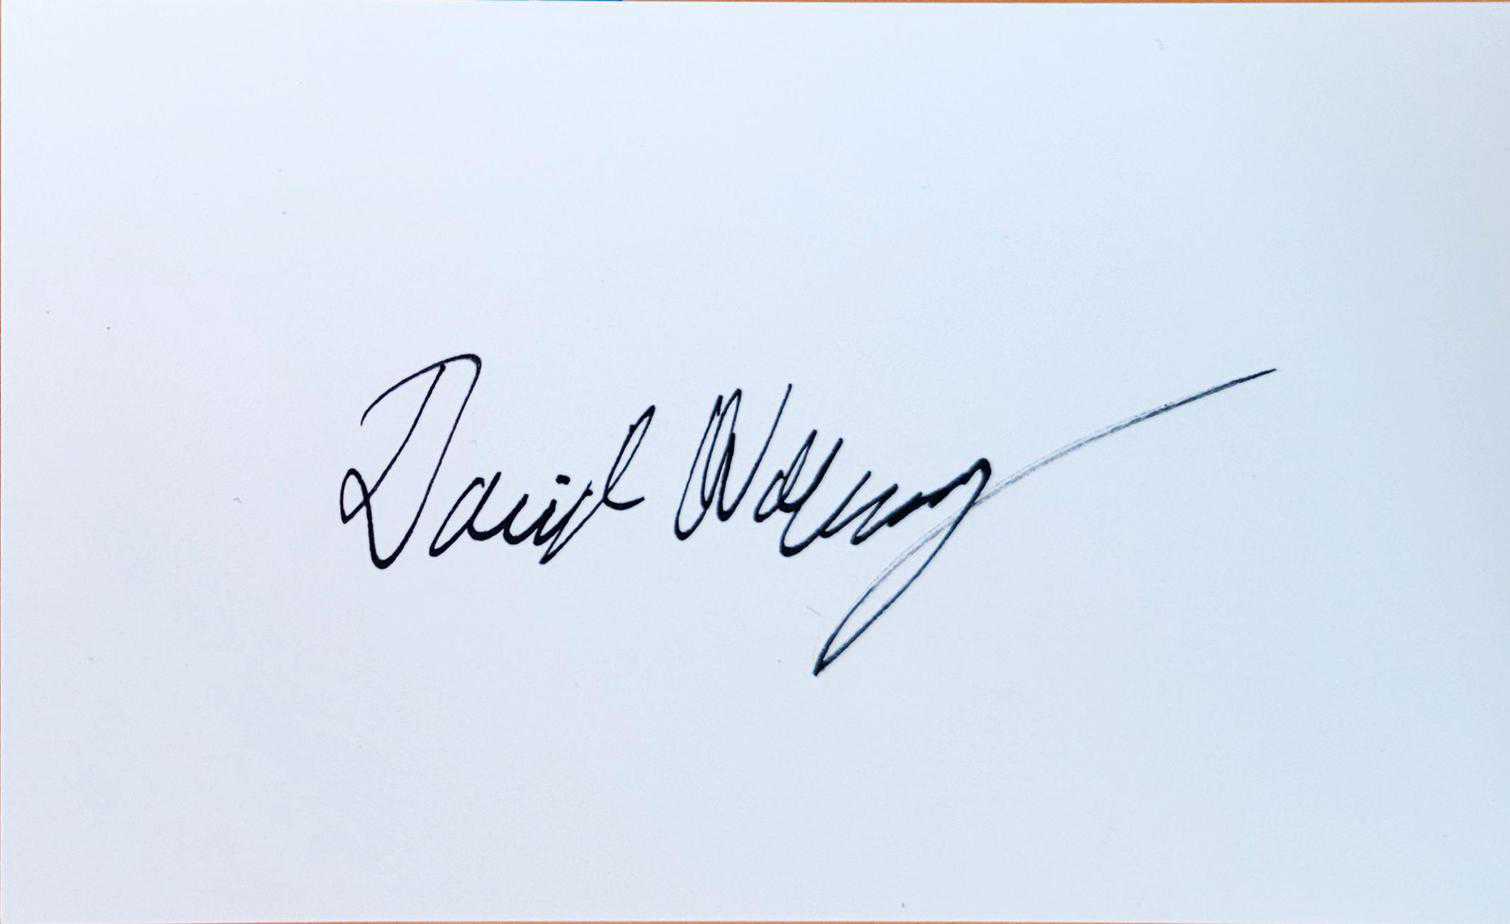 Compositor for "The Mandalorian" David Wahlberg signed index card.